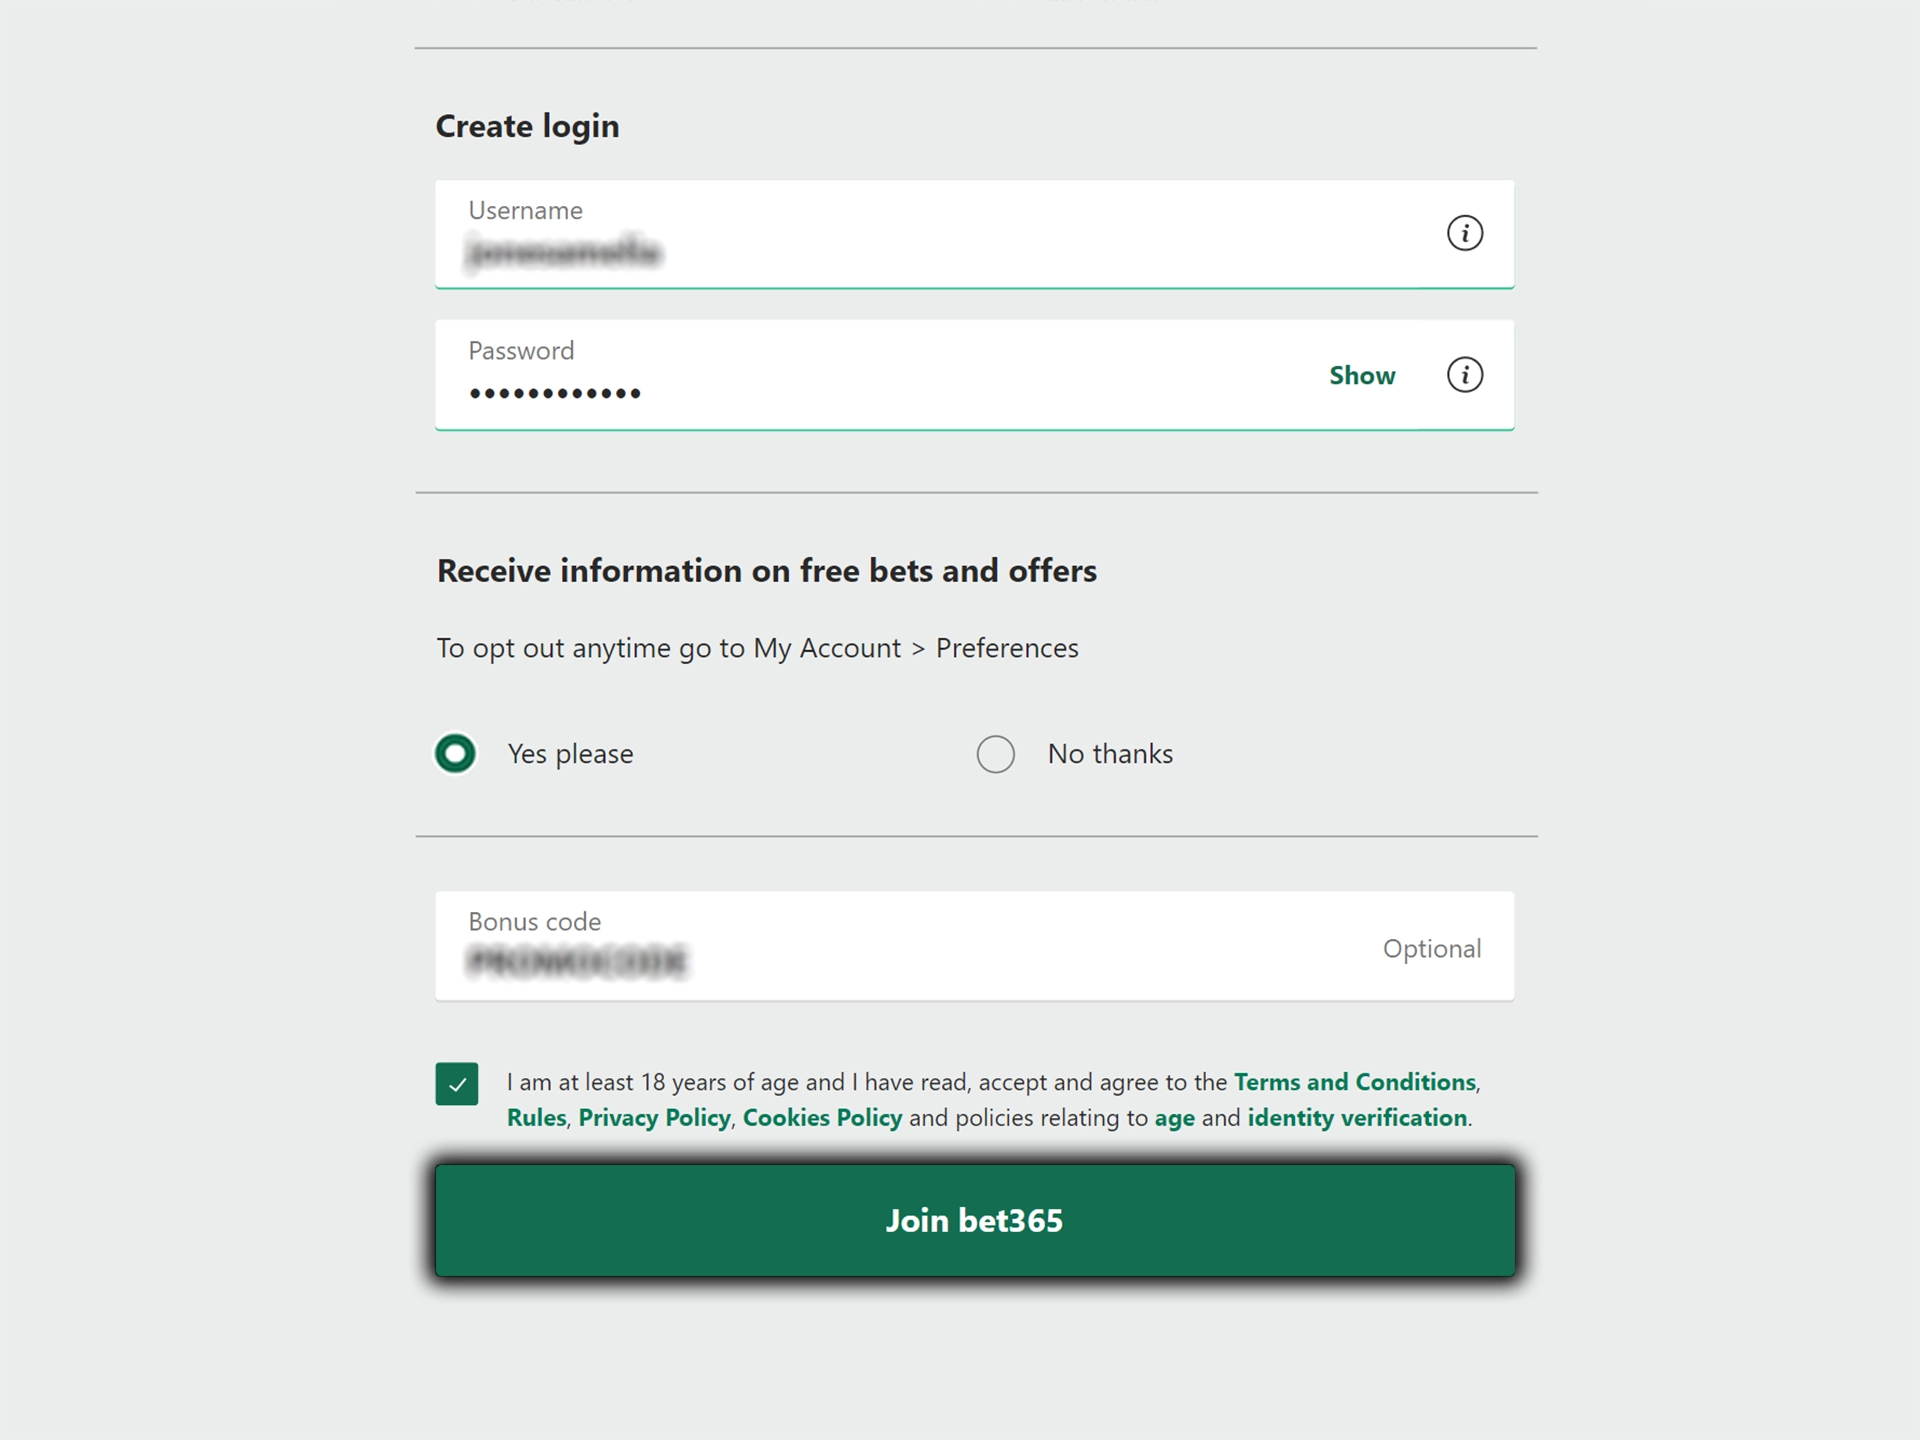 Come up with your login details and complete the Bet365 registration process.